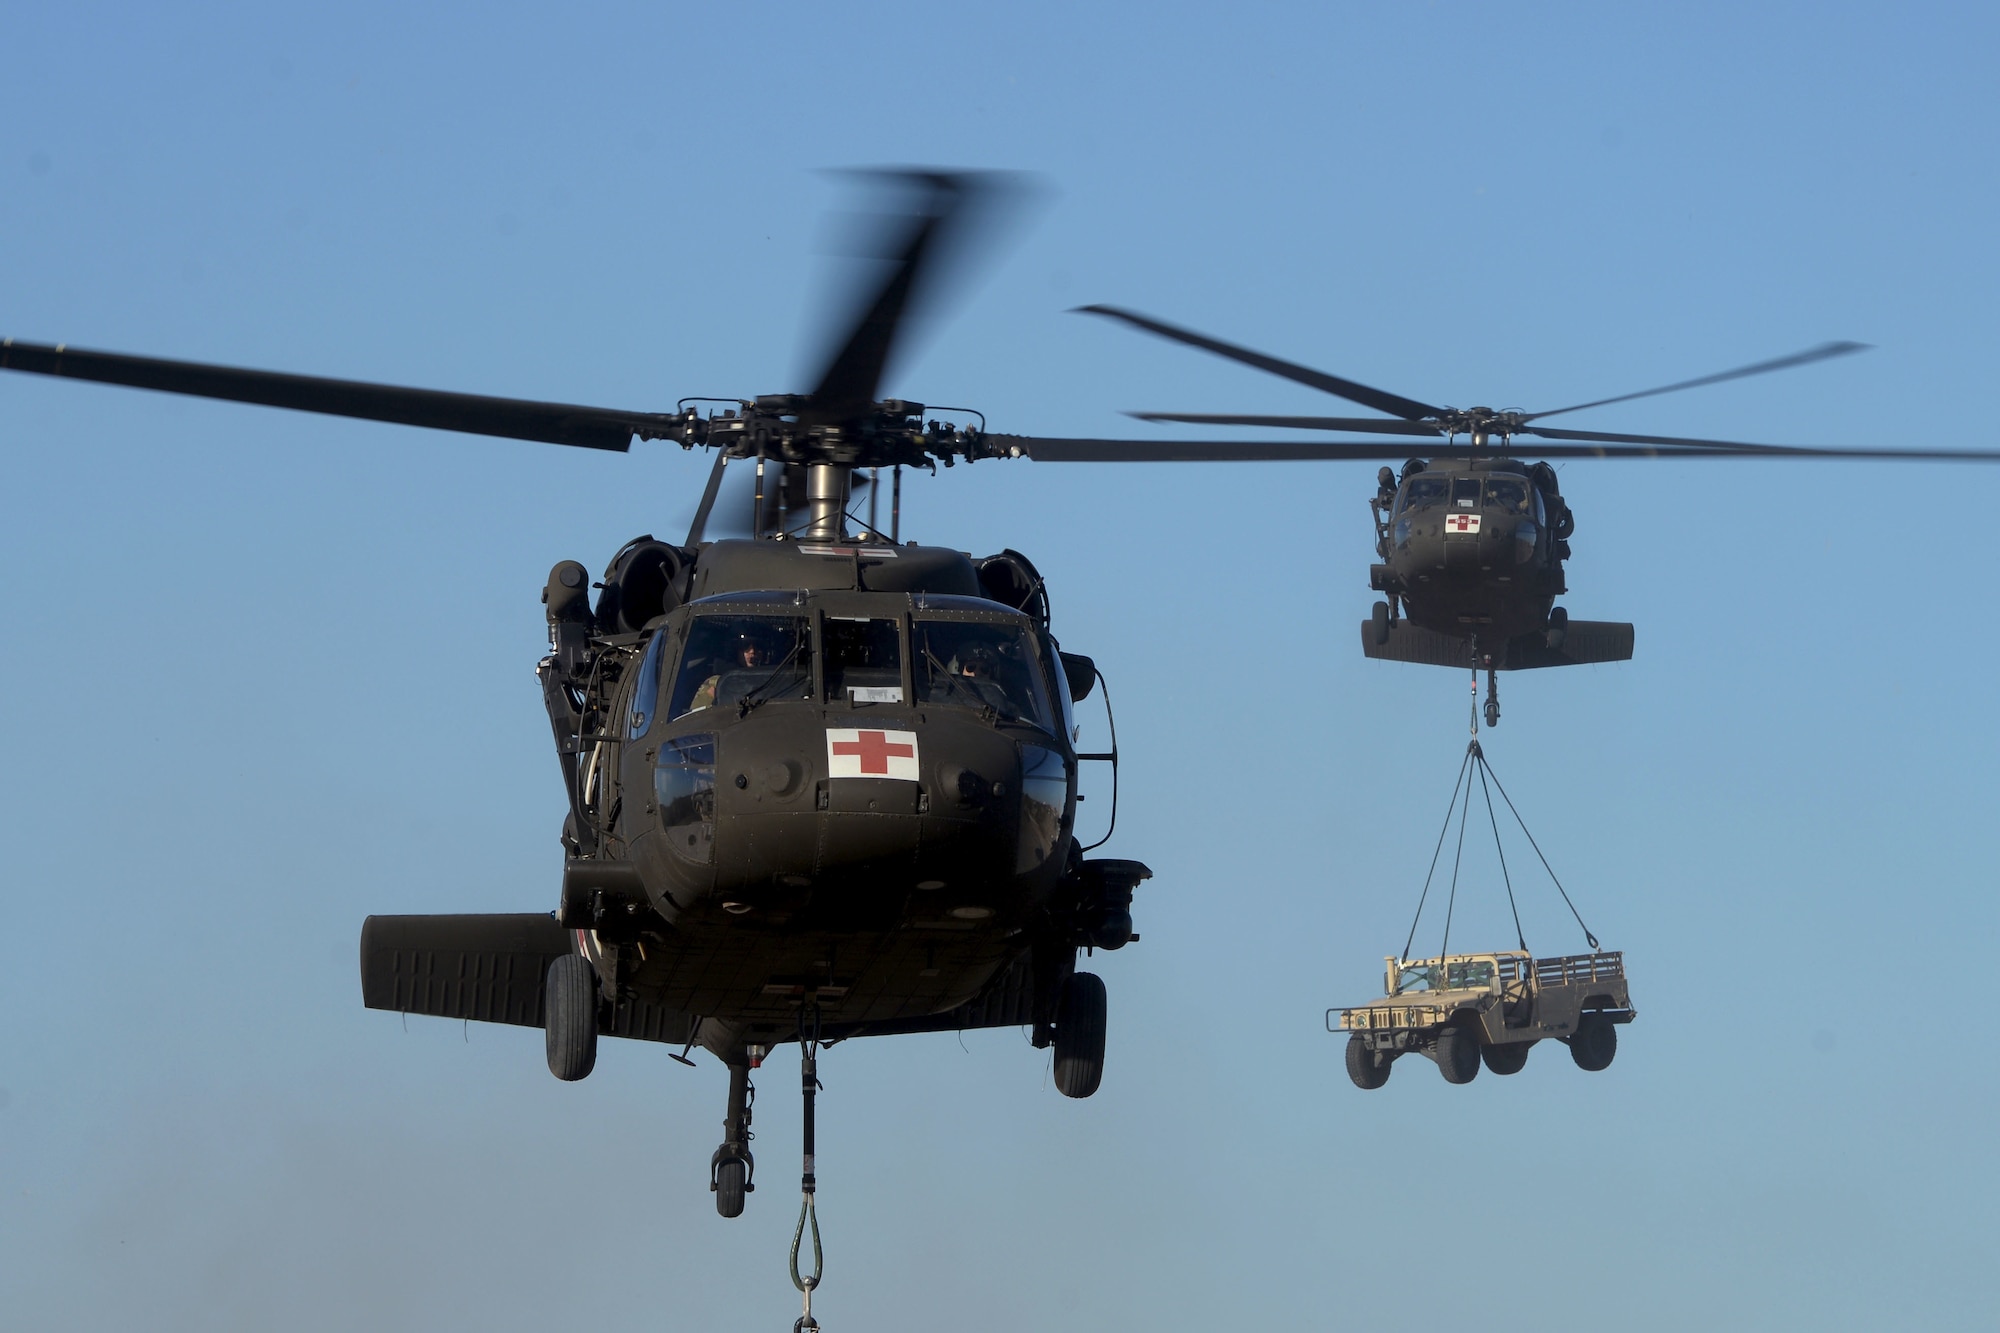 Two UH-60 Black Hawk helicopters carry sling loaded cargo to predetermined destinations during Operation Nightstorm Dec. 15, 2020, at Joint Base San Antonio-Chapman Training Annex, Texas. (U.S. Air Force photo by Tech. Sgt. Samantha Mathison)